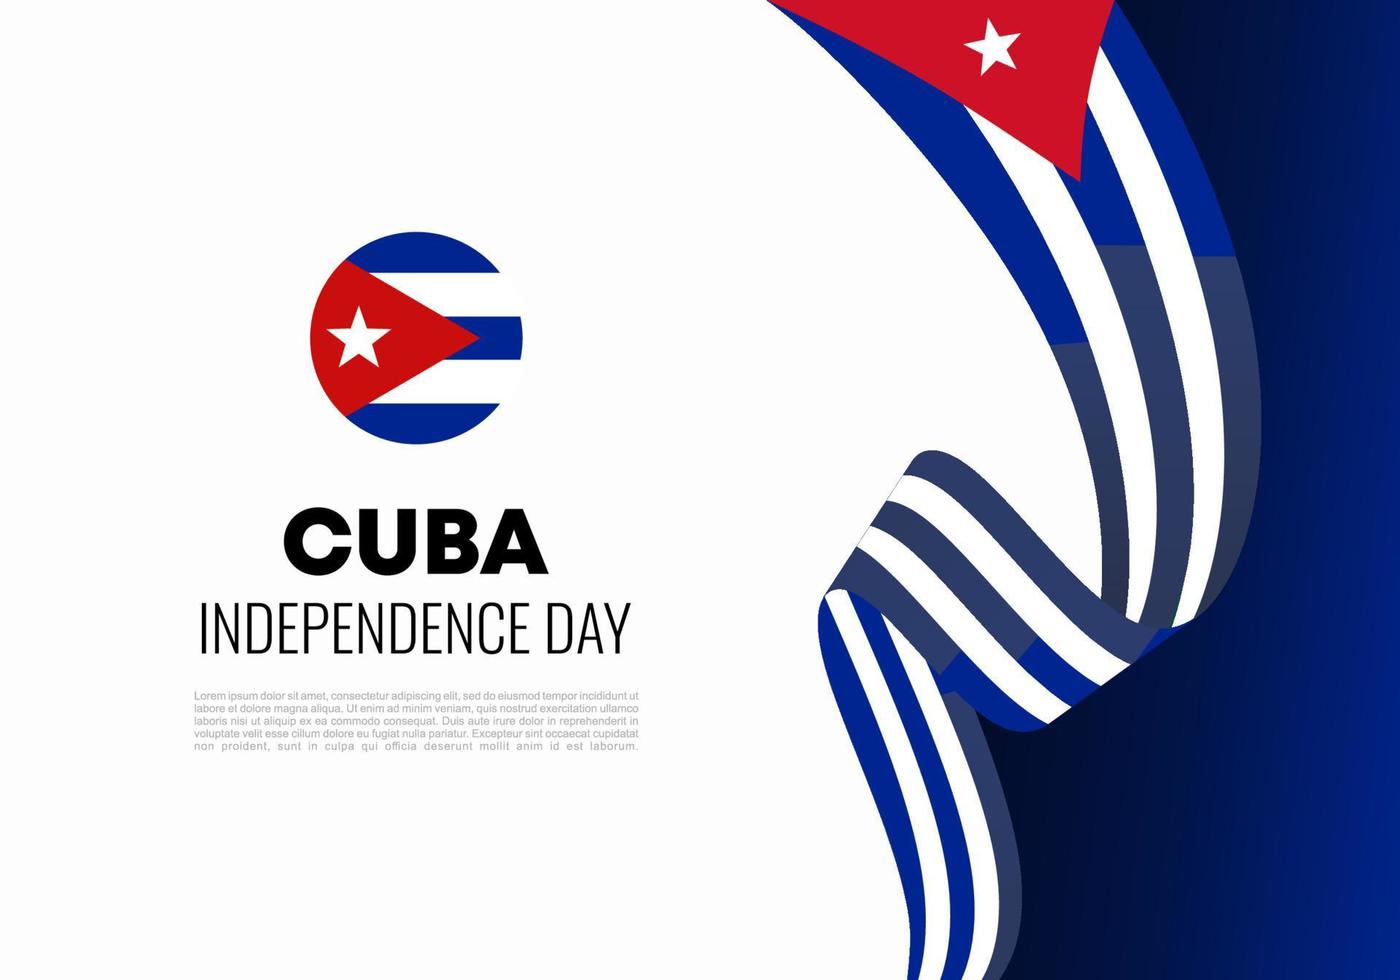 Cuba independence day for national celebration october 10. vector